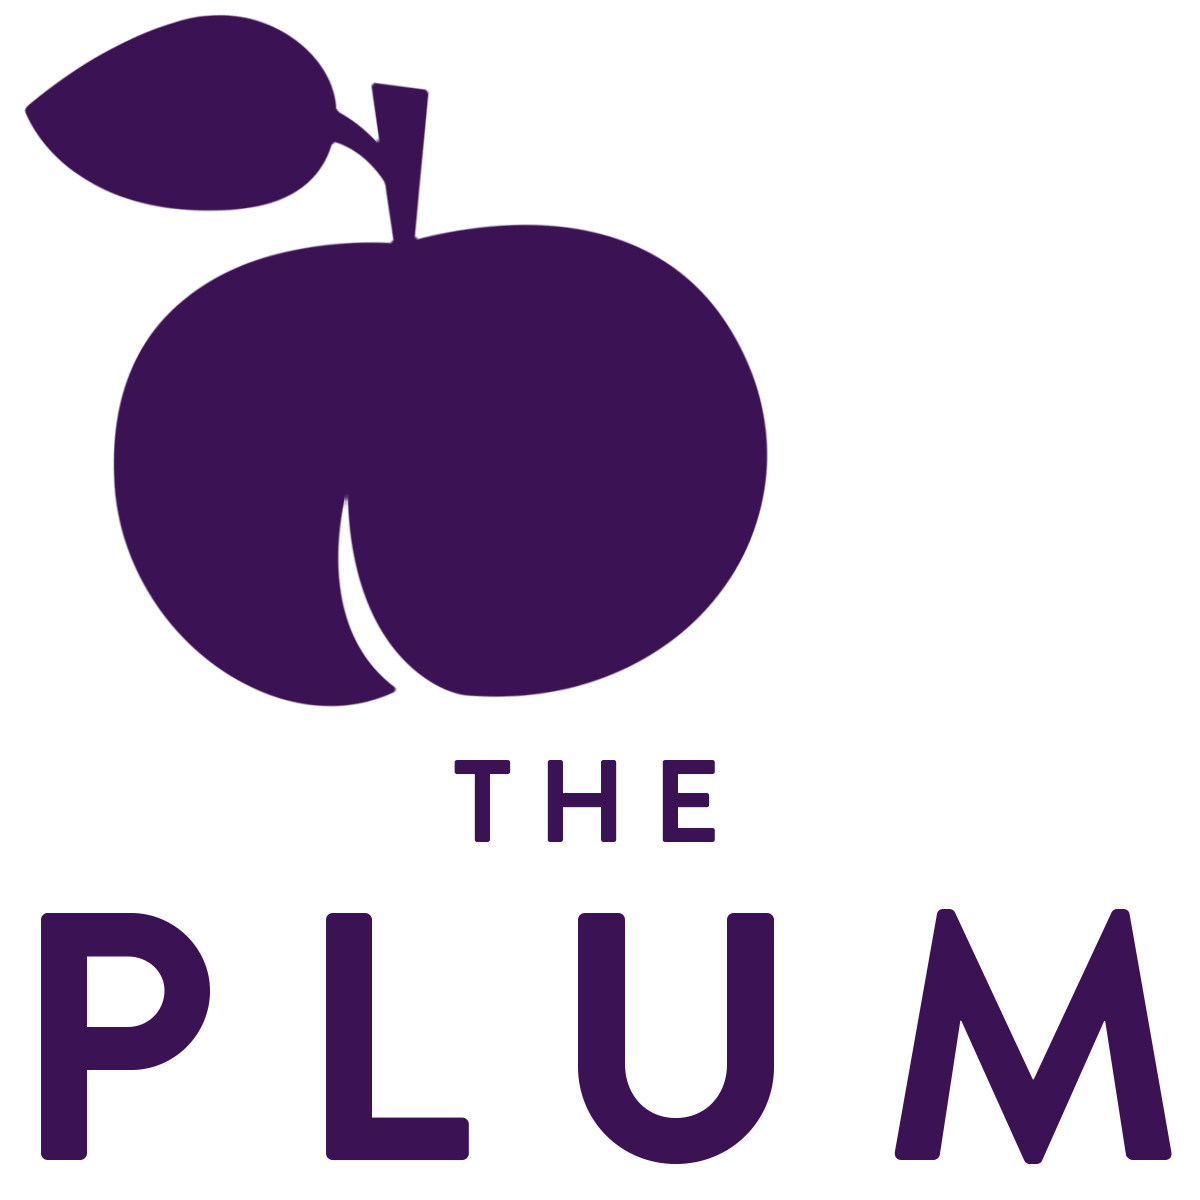 New over-40 media platform THE PLUM publishes first-of-its-kind package about menopause, featuring 51 real women's stories and more